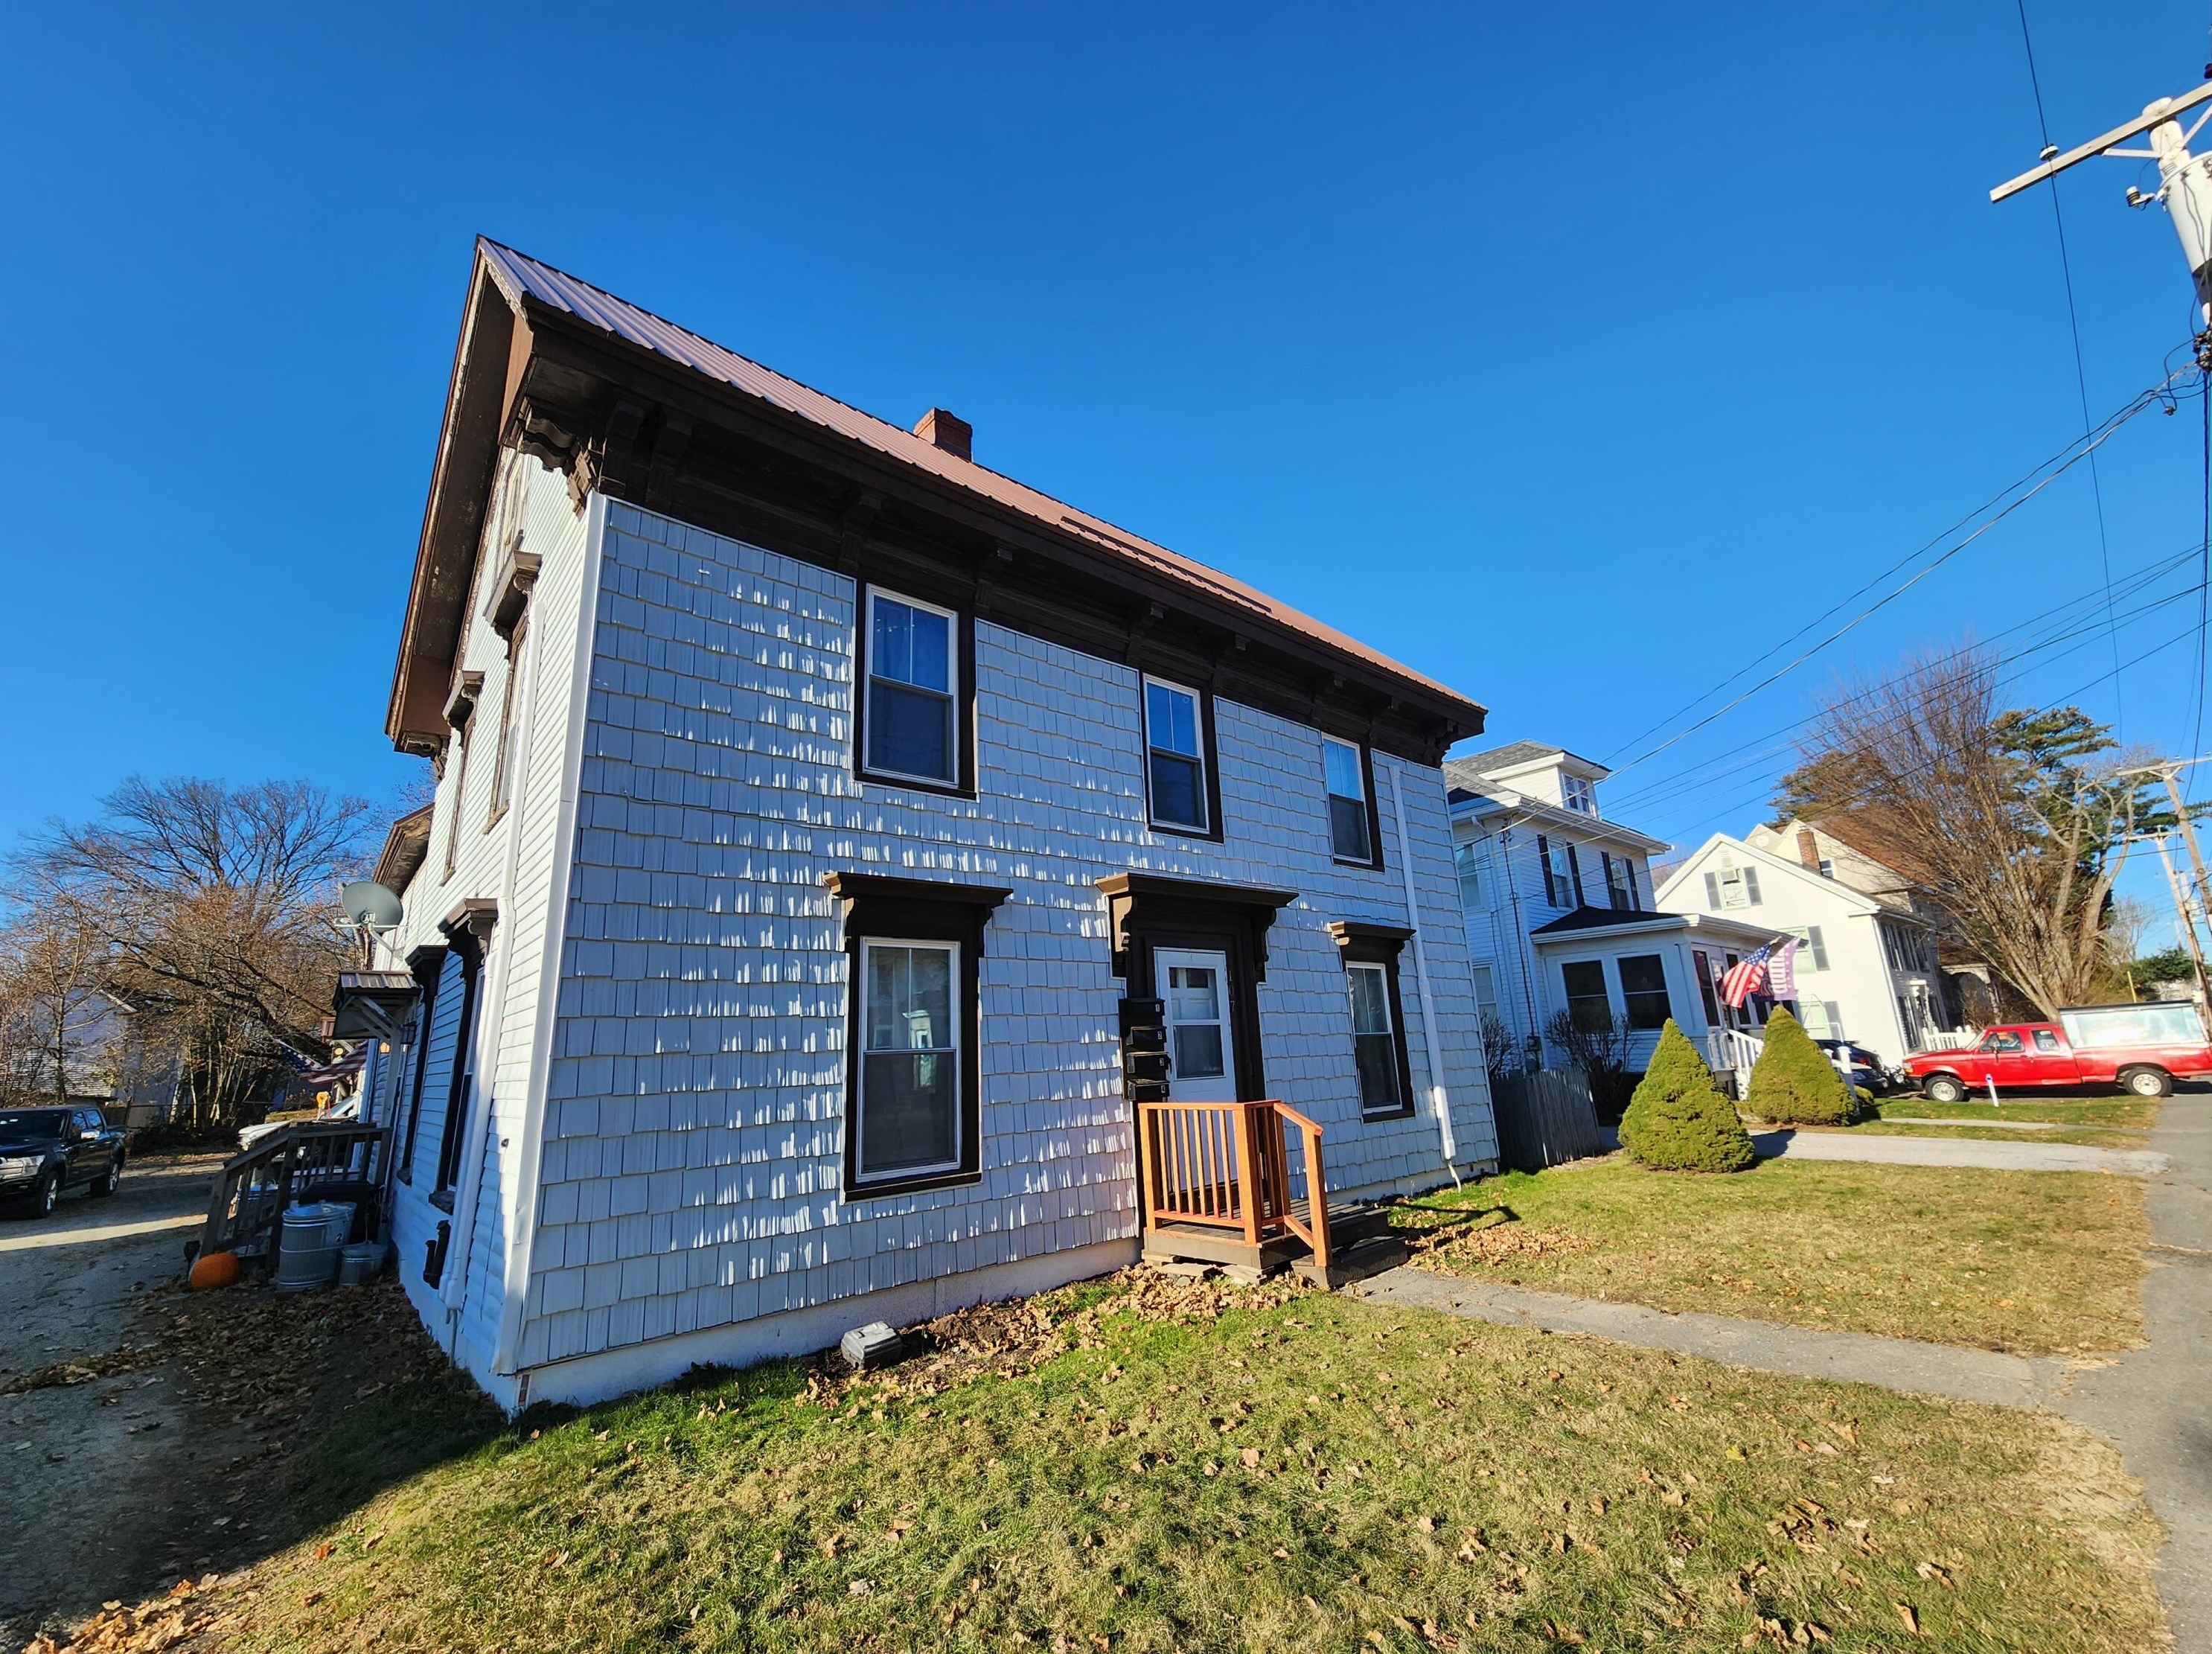 107 State St, Brewer, ME 04412